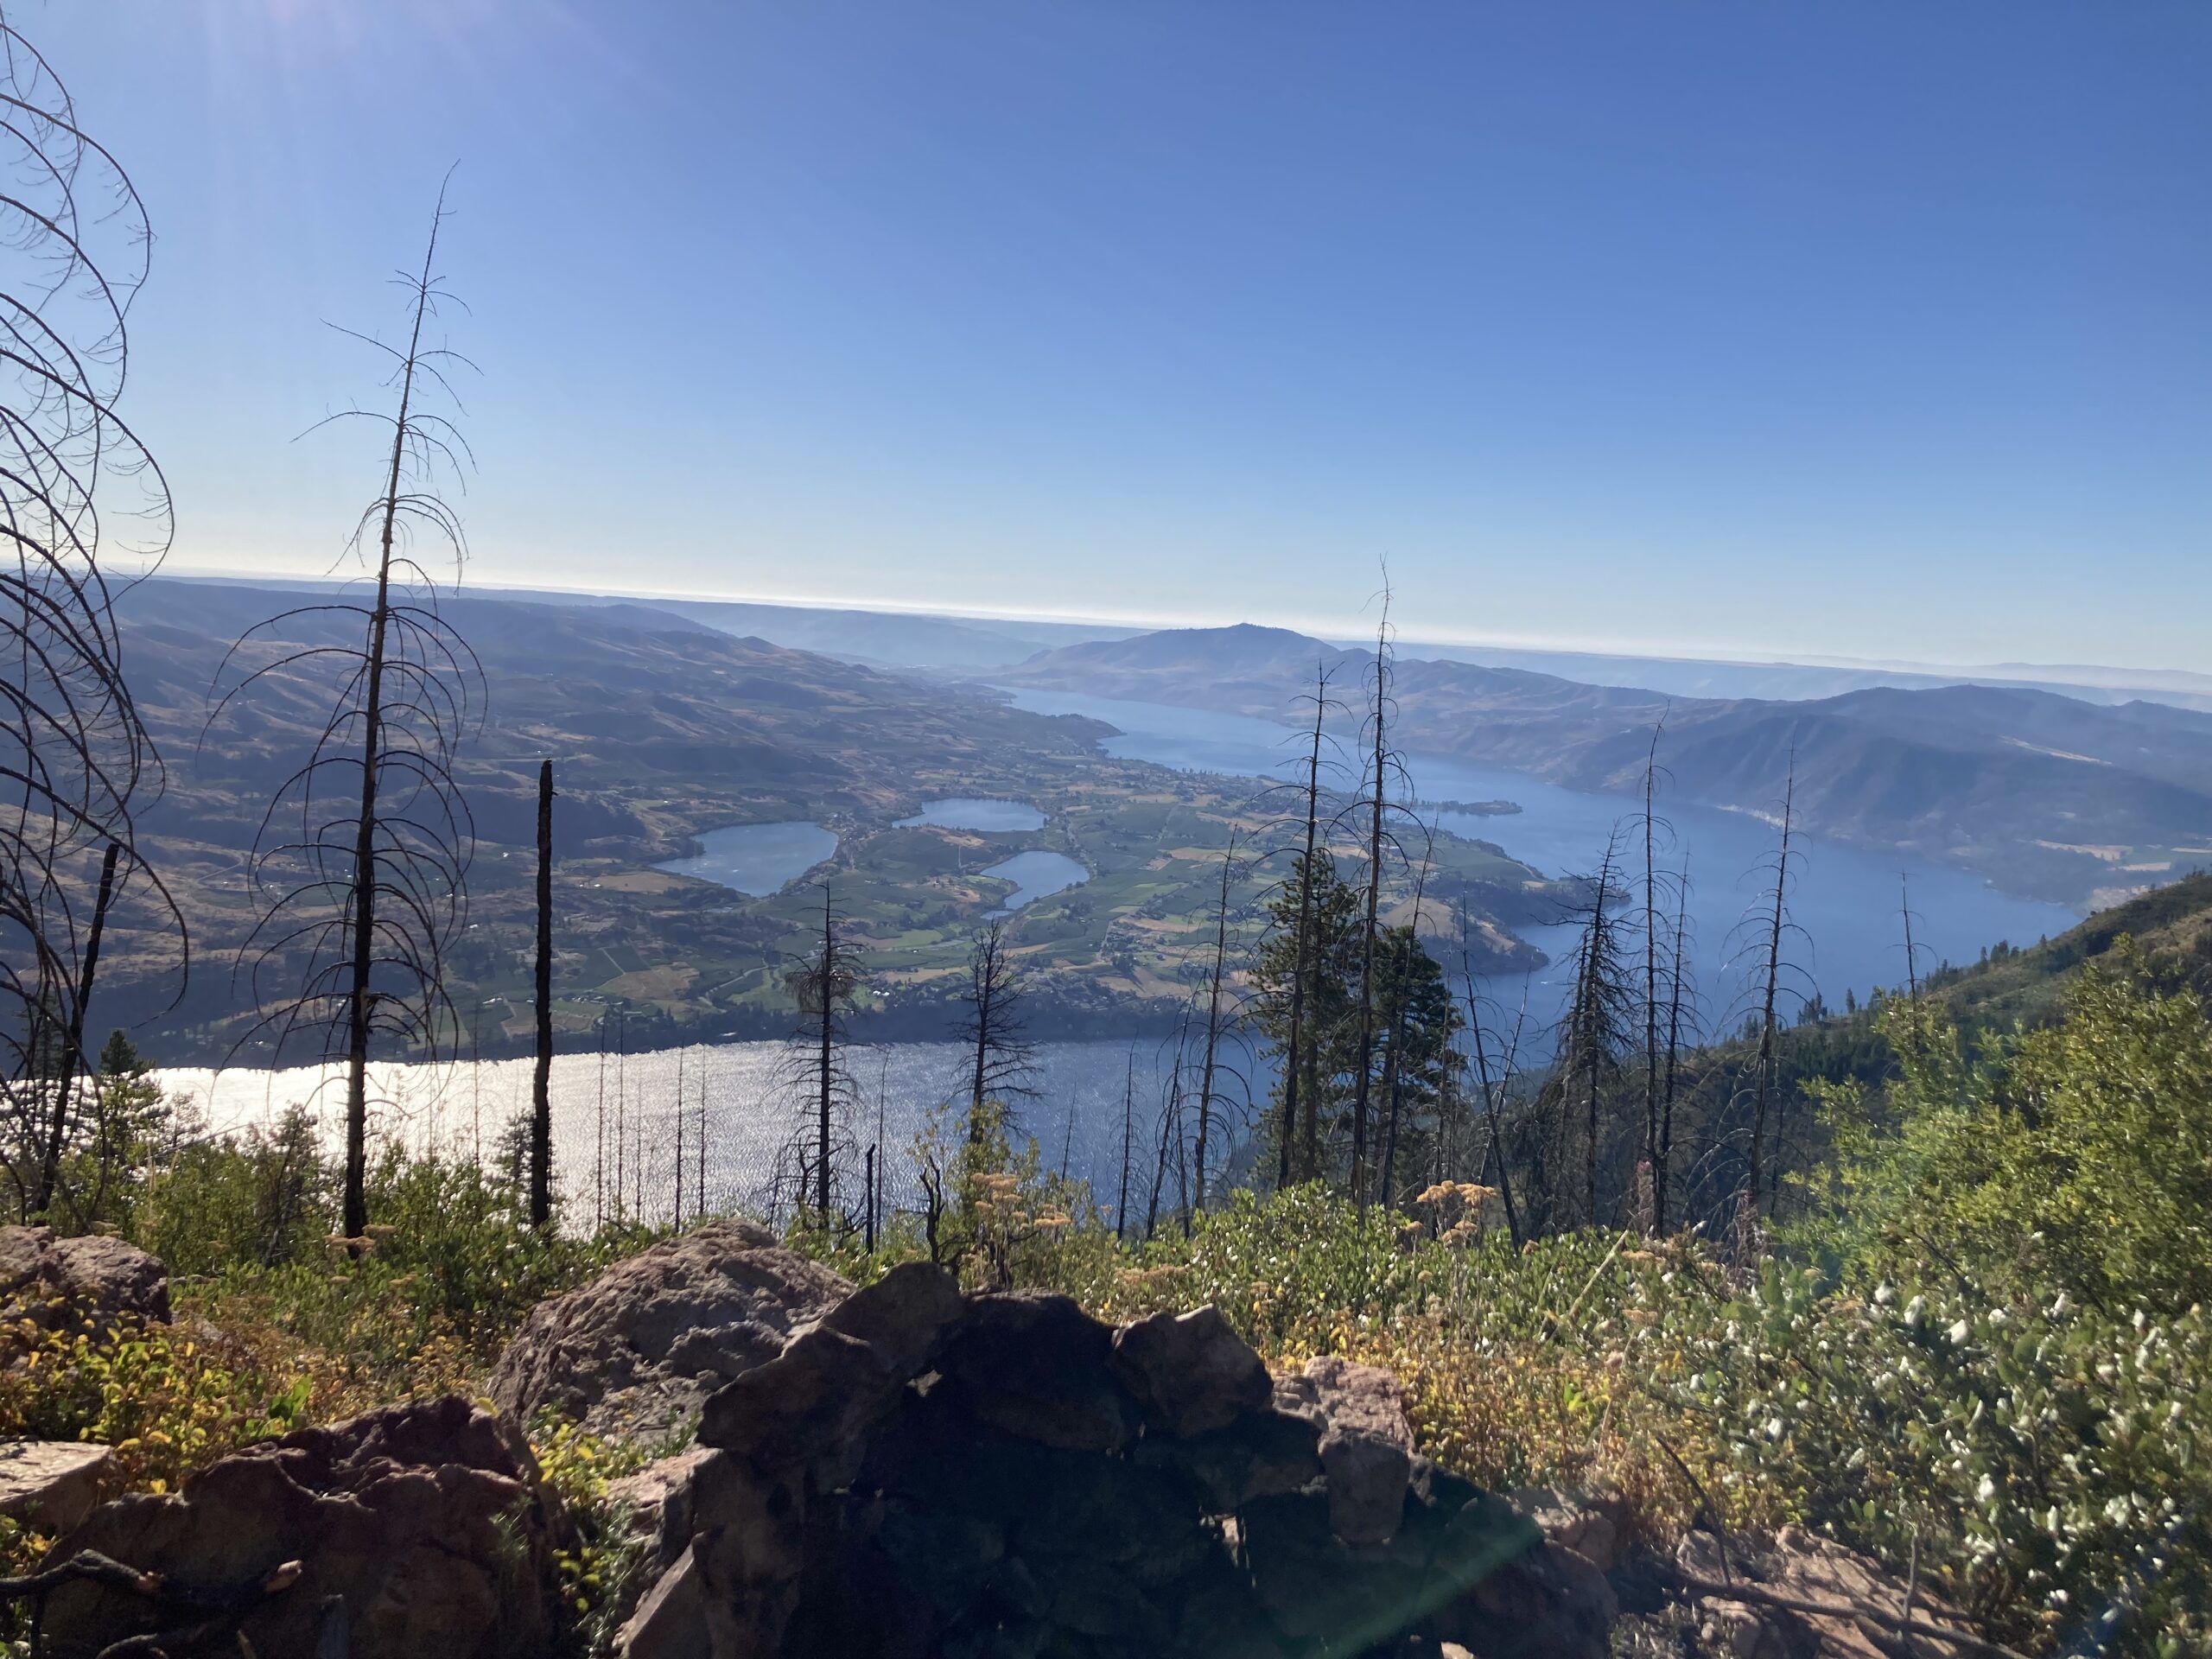 Looking down at Lake Chelan from The Jungle.